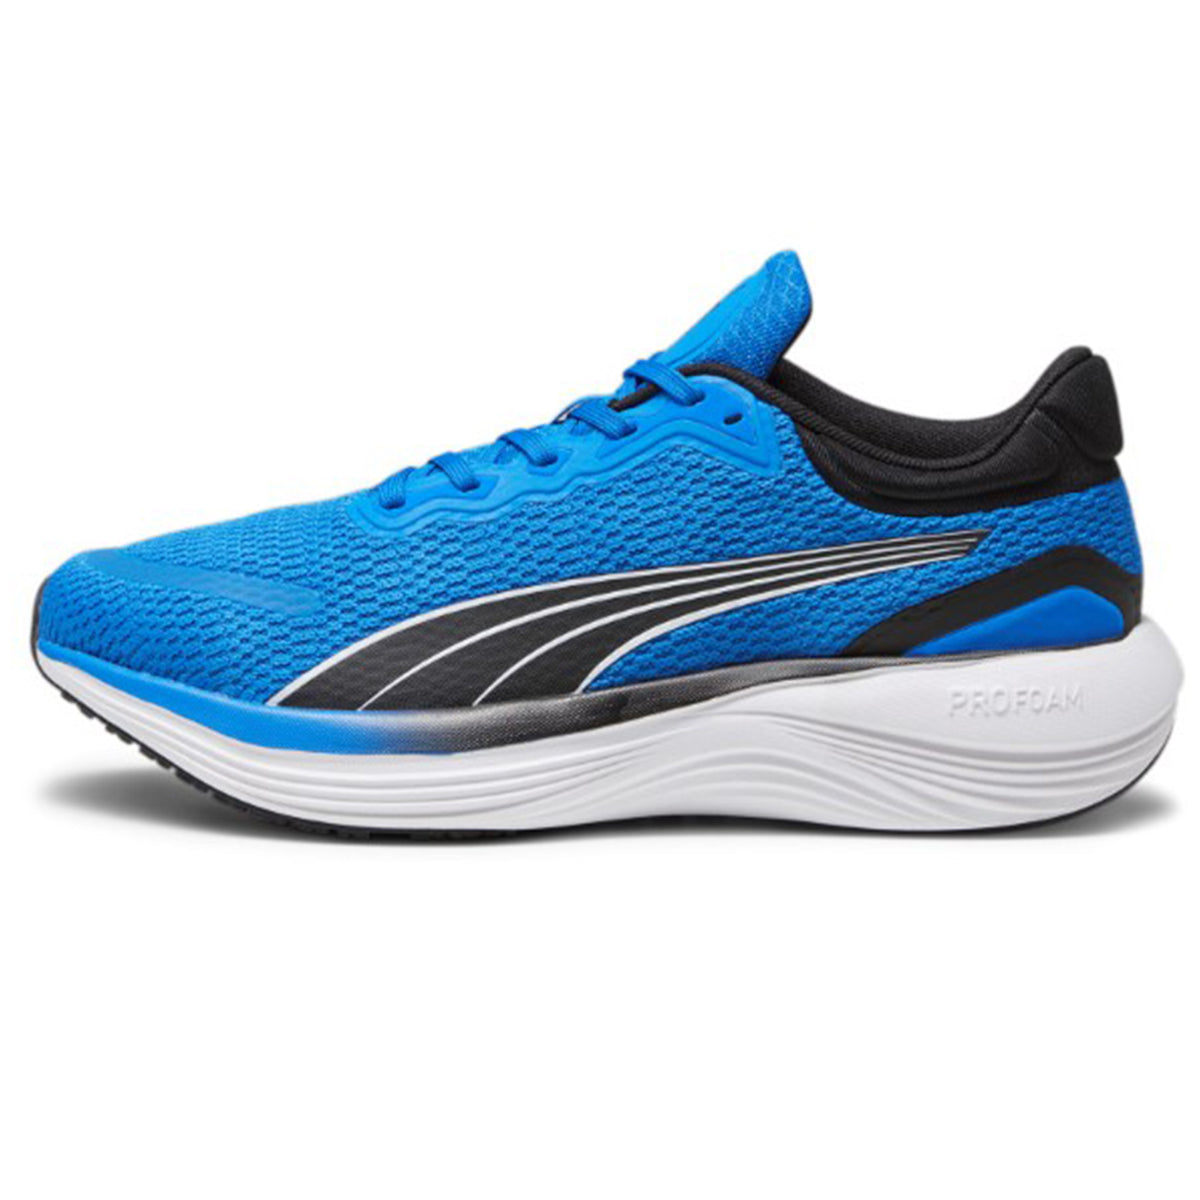 Puma Scend Pro Mens Running Shoes: Ultra Blue/White